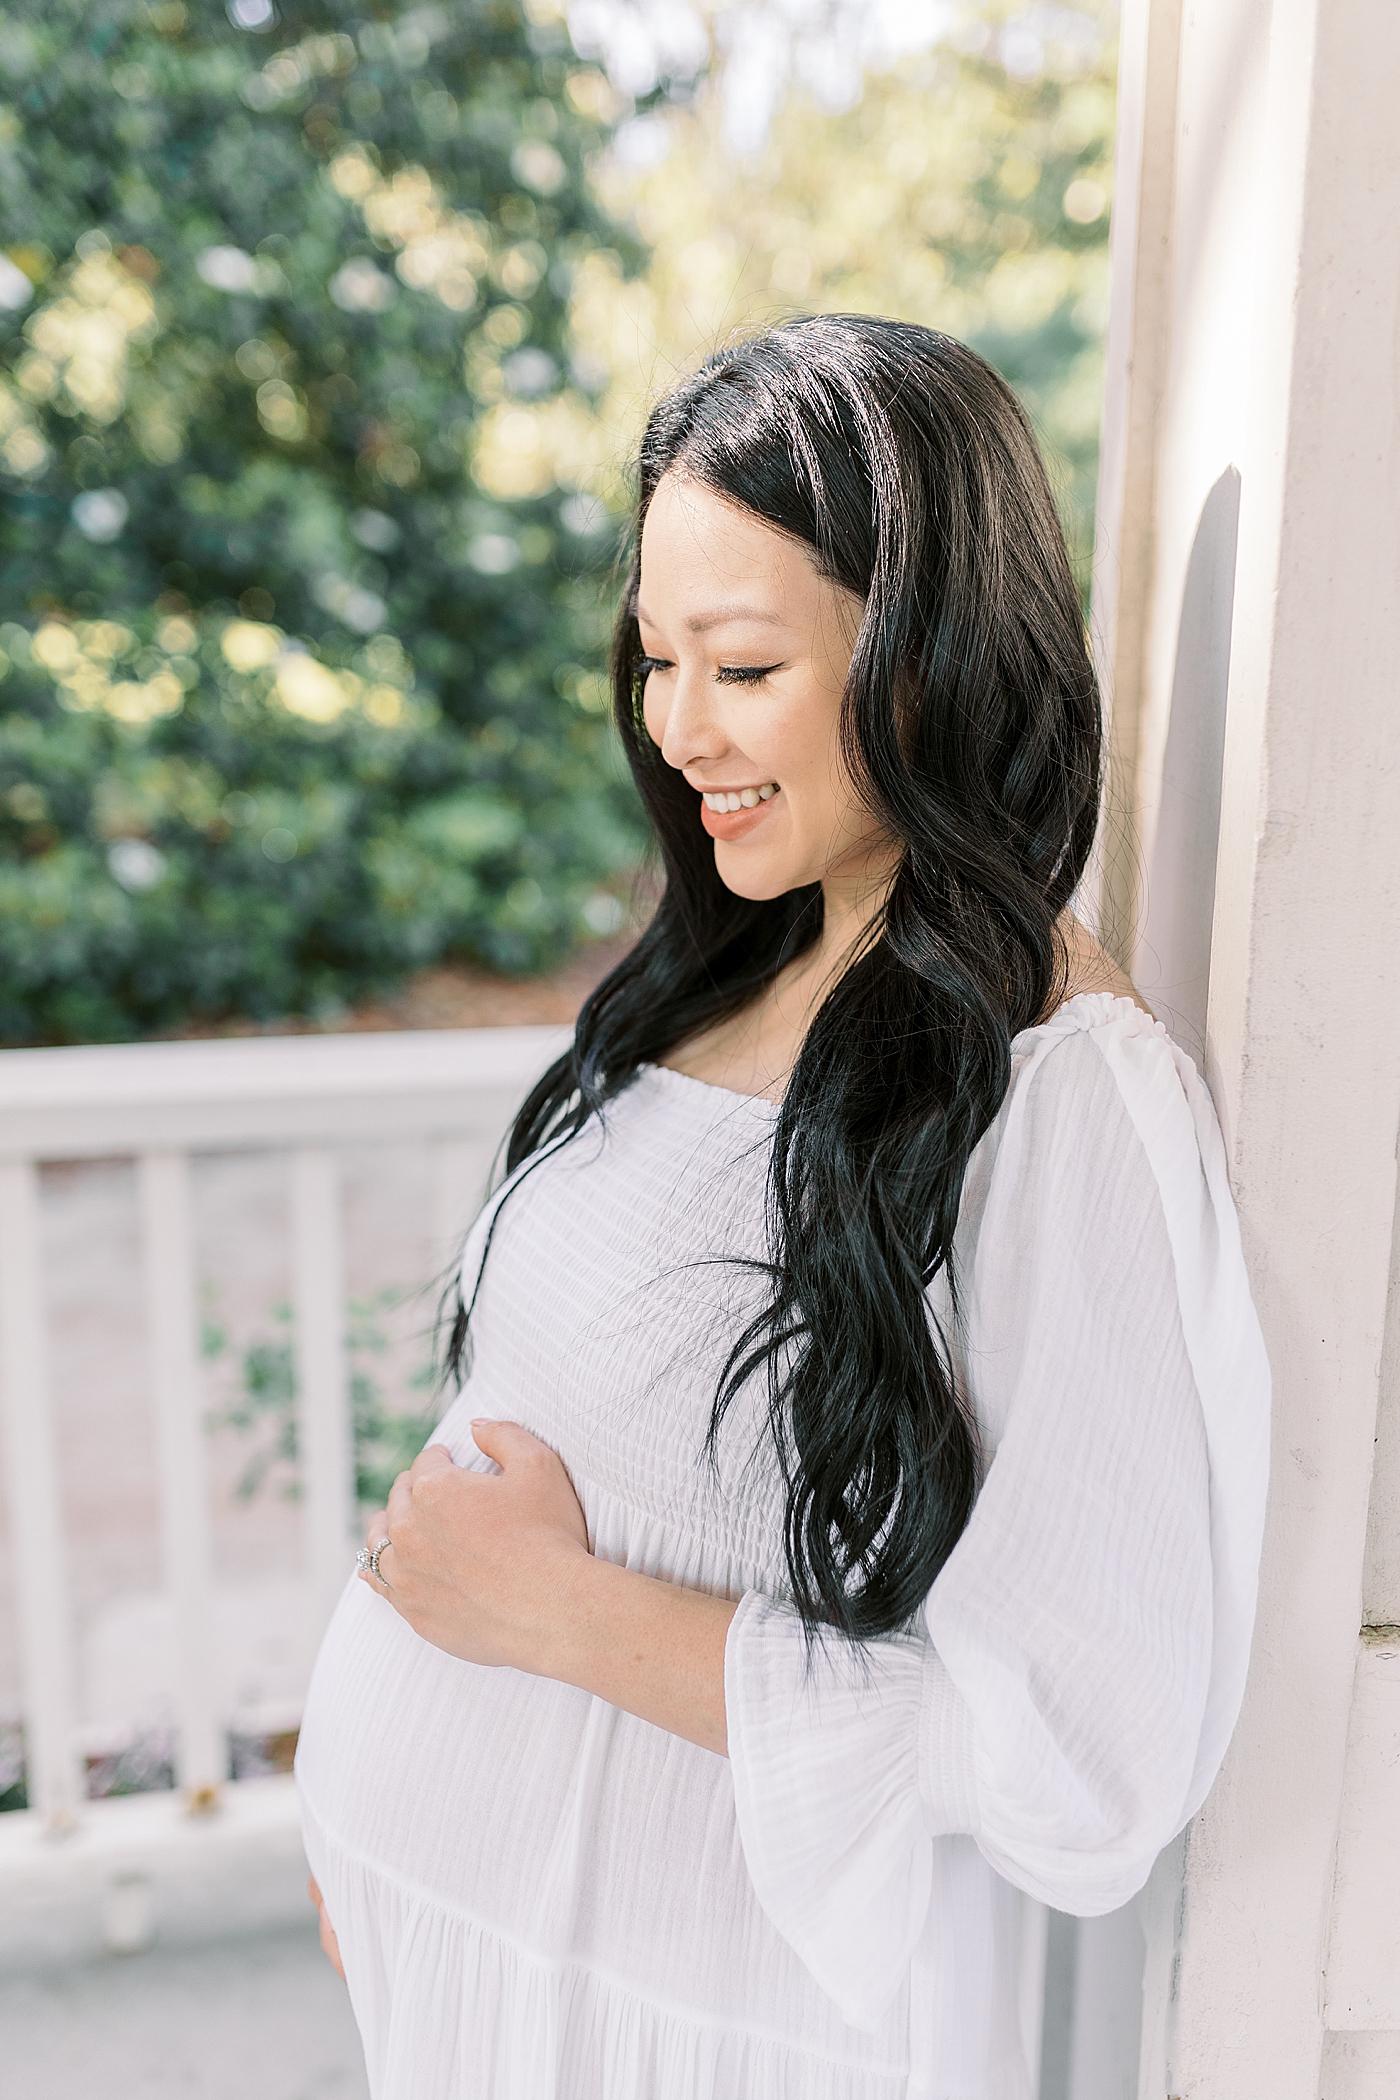 Smiling mother to be in a white dress | Photo by Caitlyn Motycka Photography